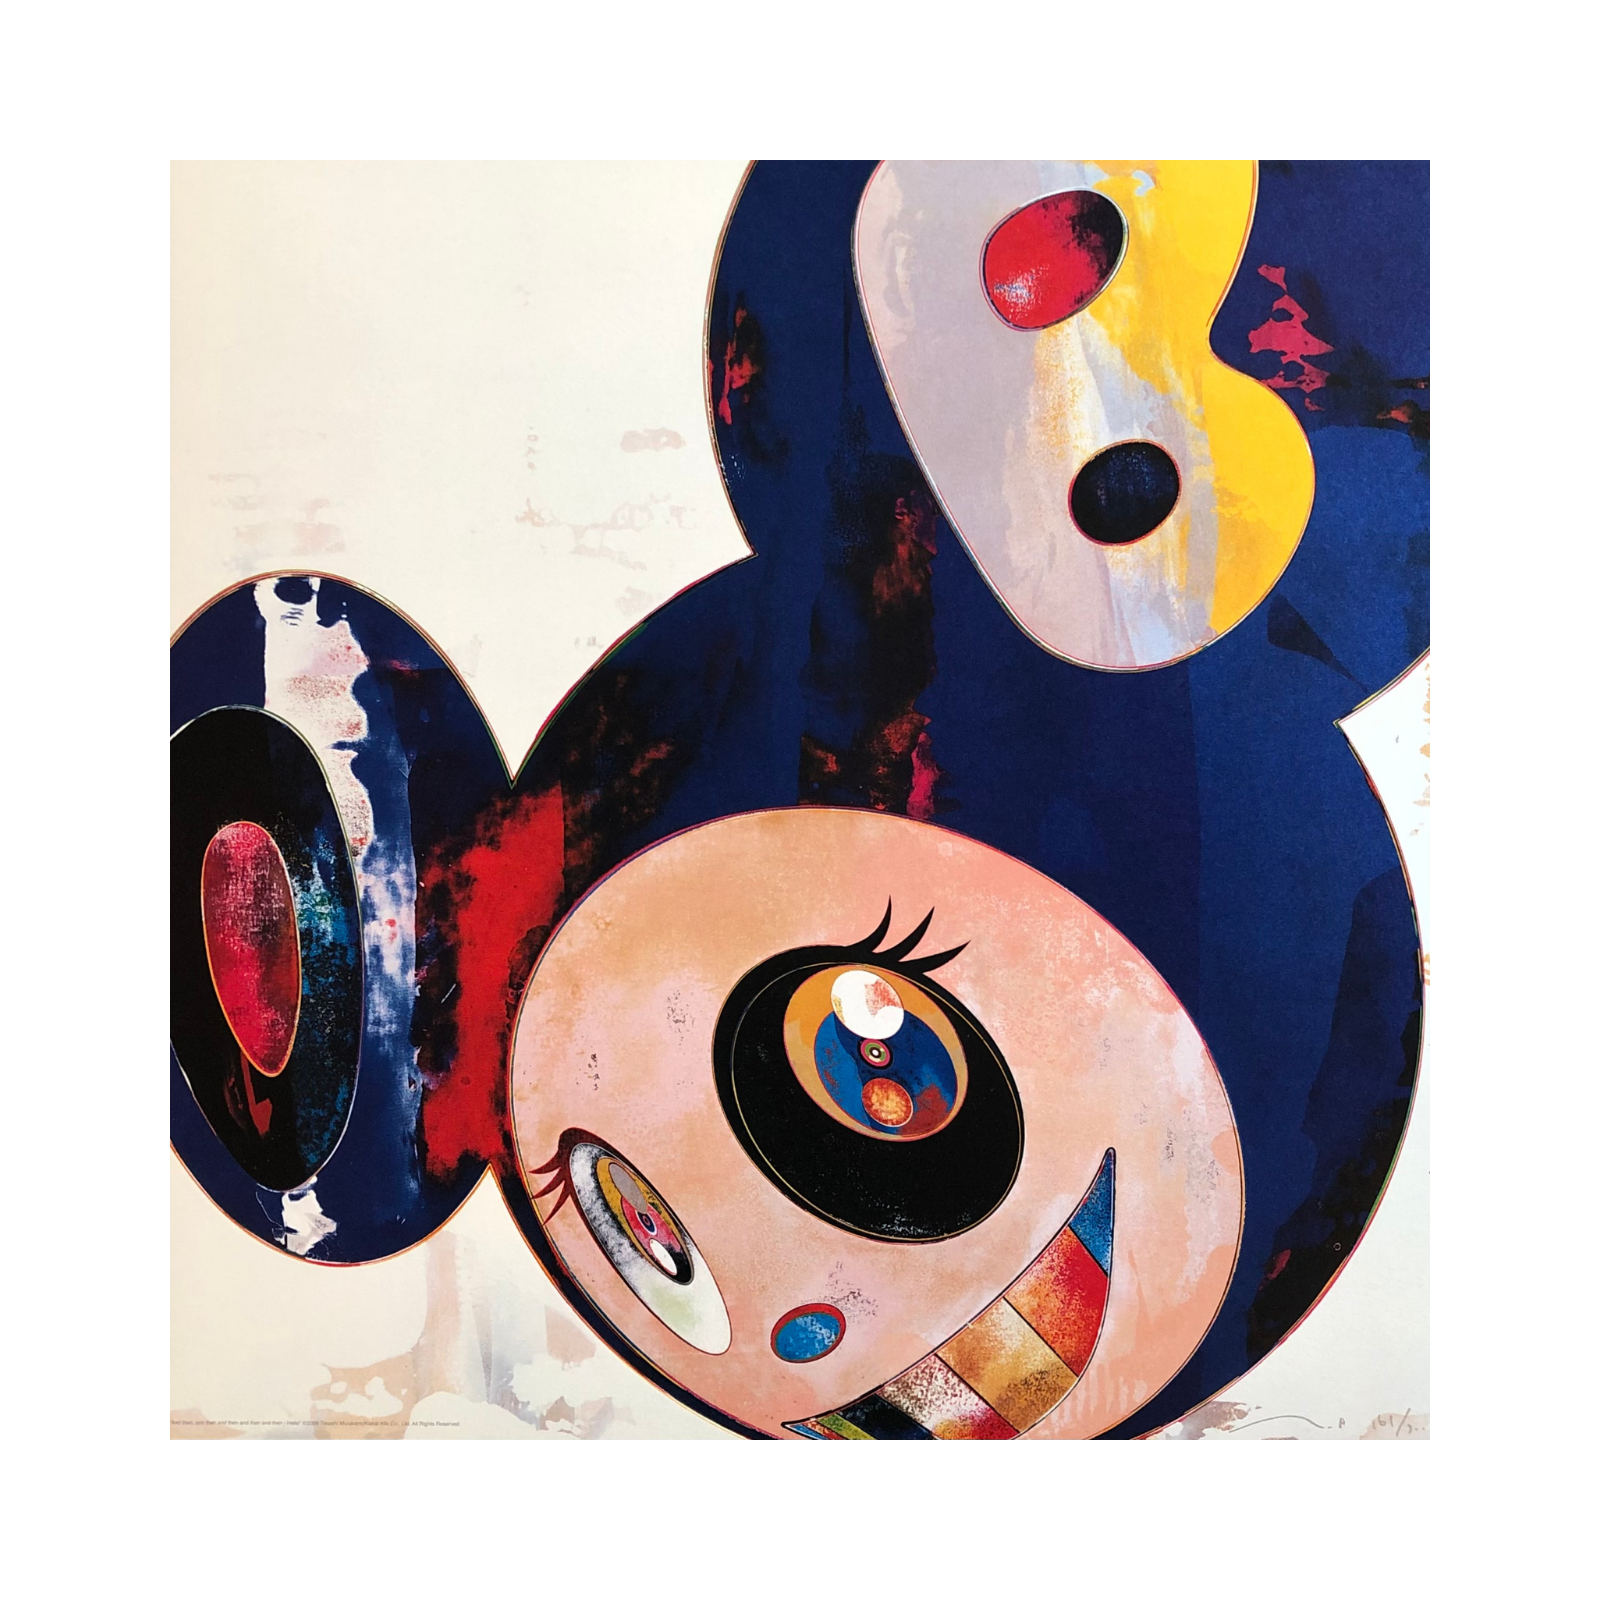 Takashi Murakami - And then, and then and then and then and then